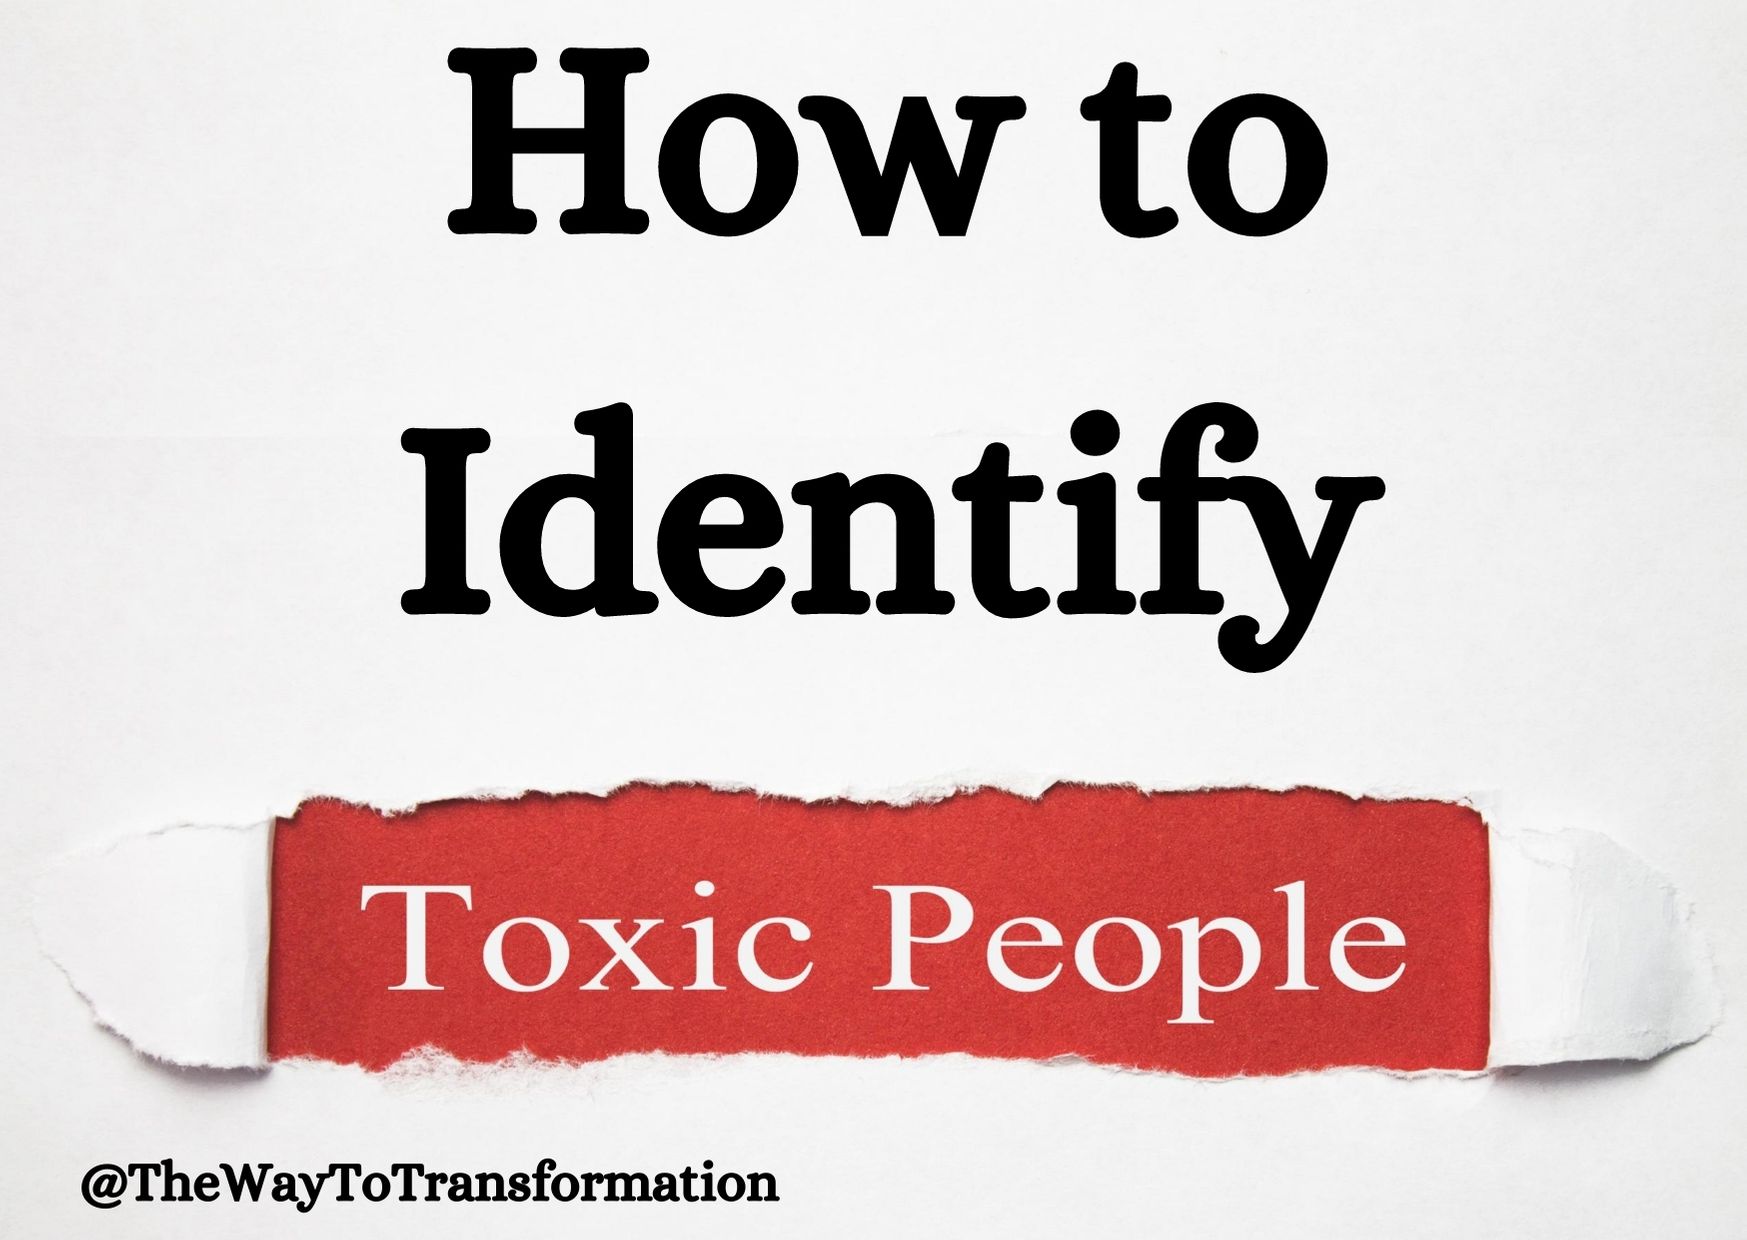 How to Identify Toxic People